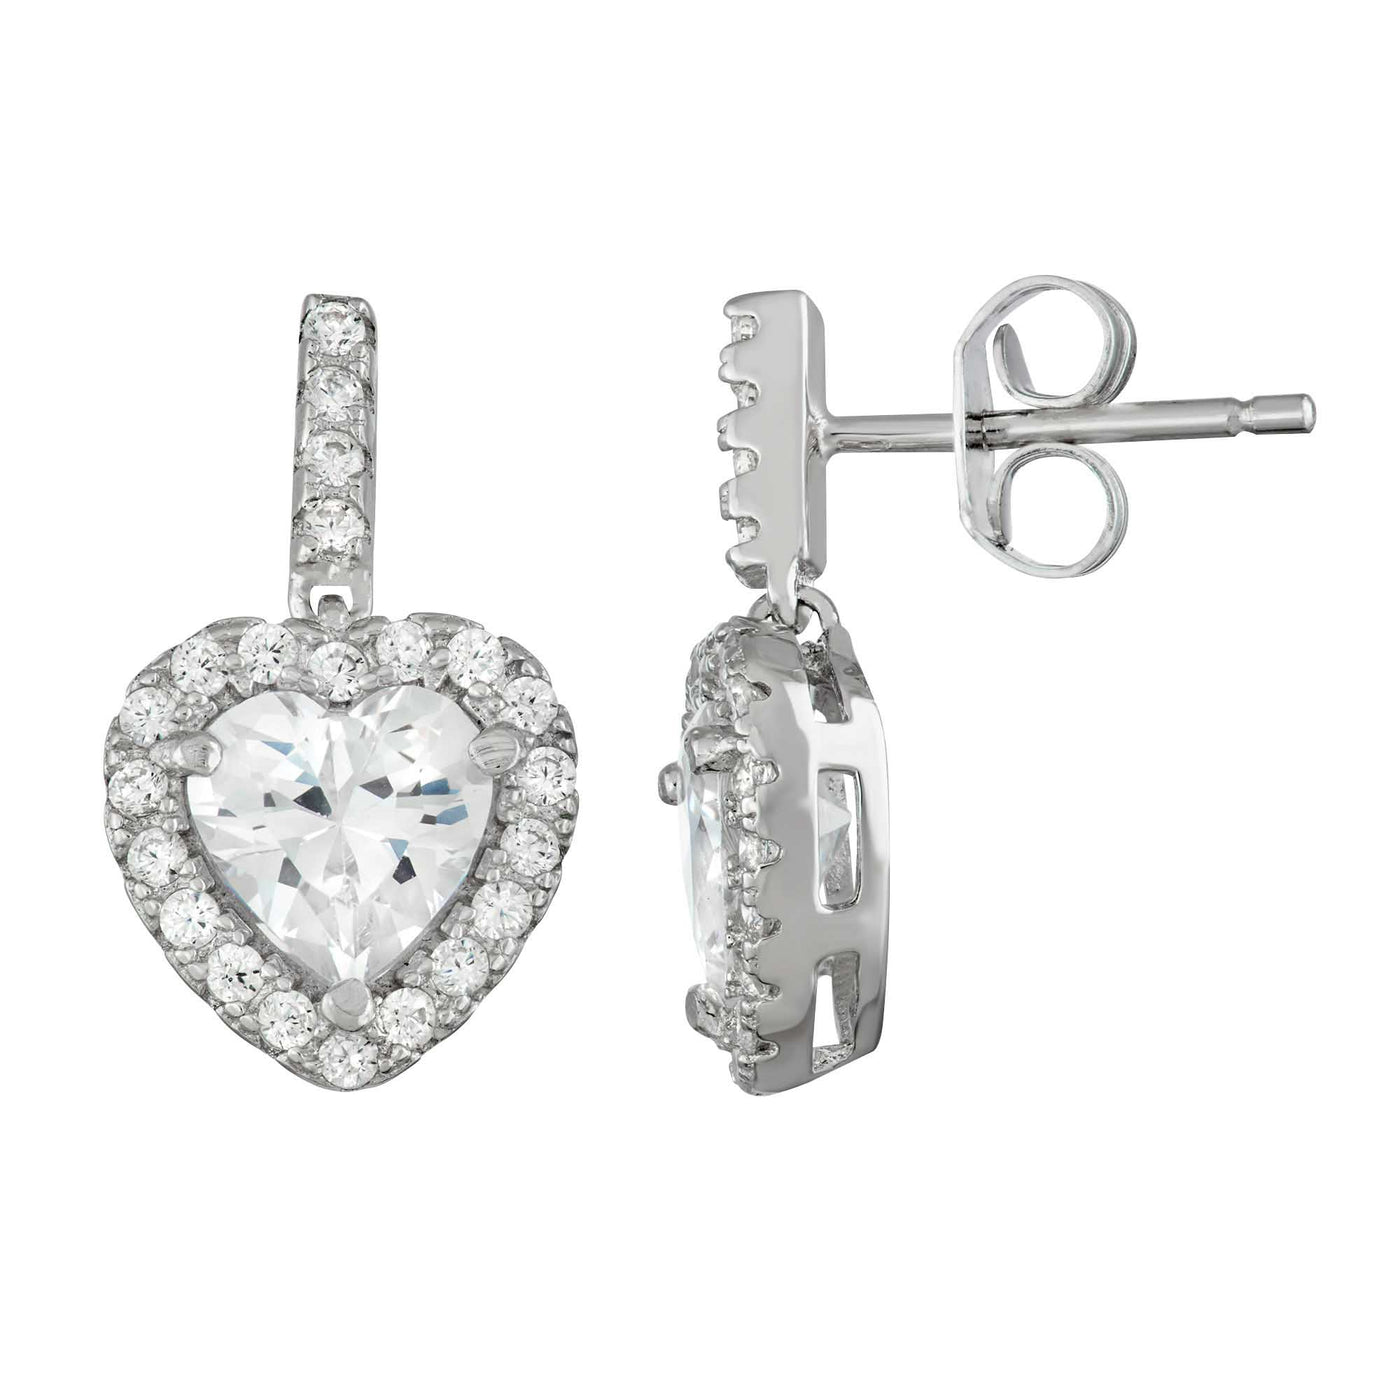 Rebecca Sloane Silver Heart With CZ And Faceted White CZ Earrings